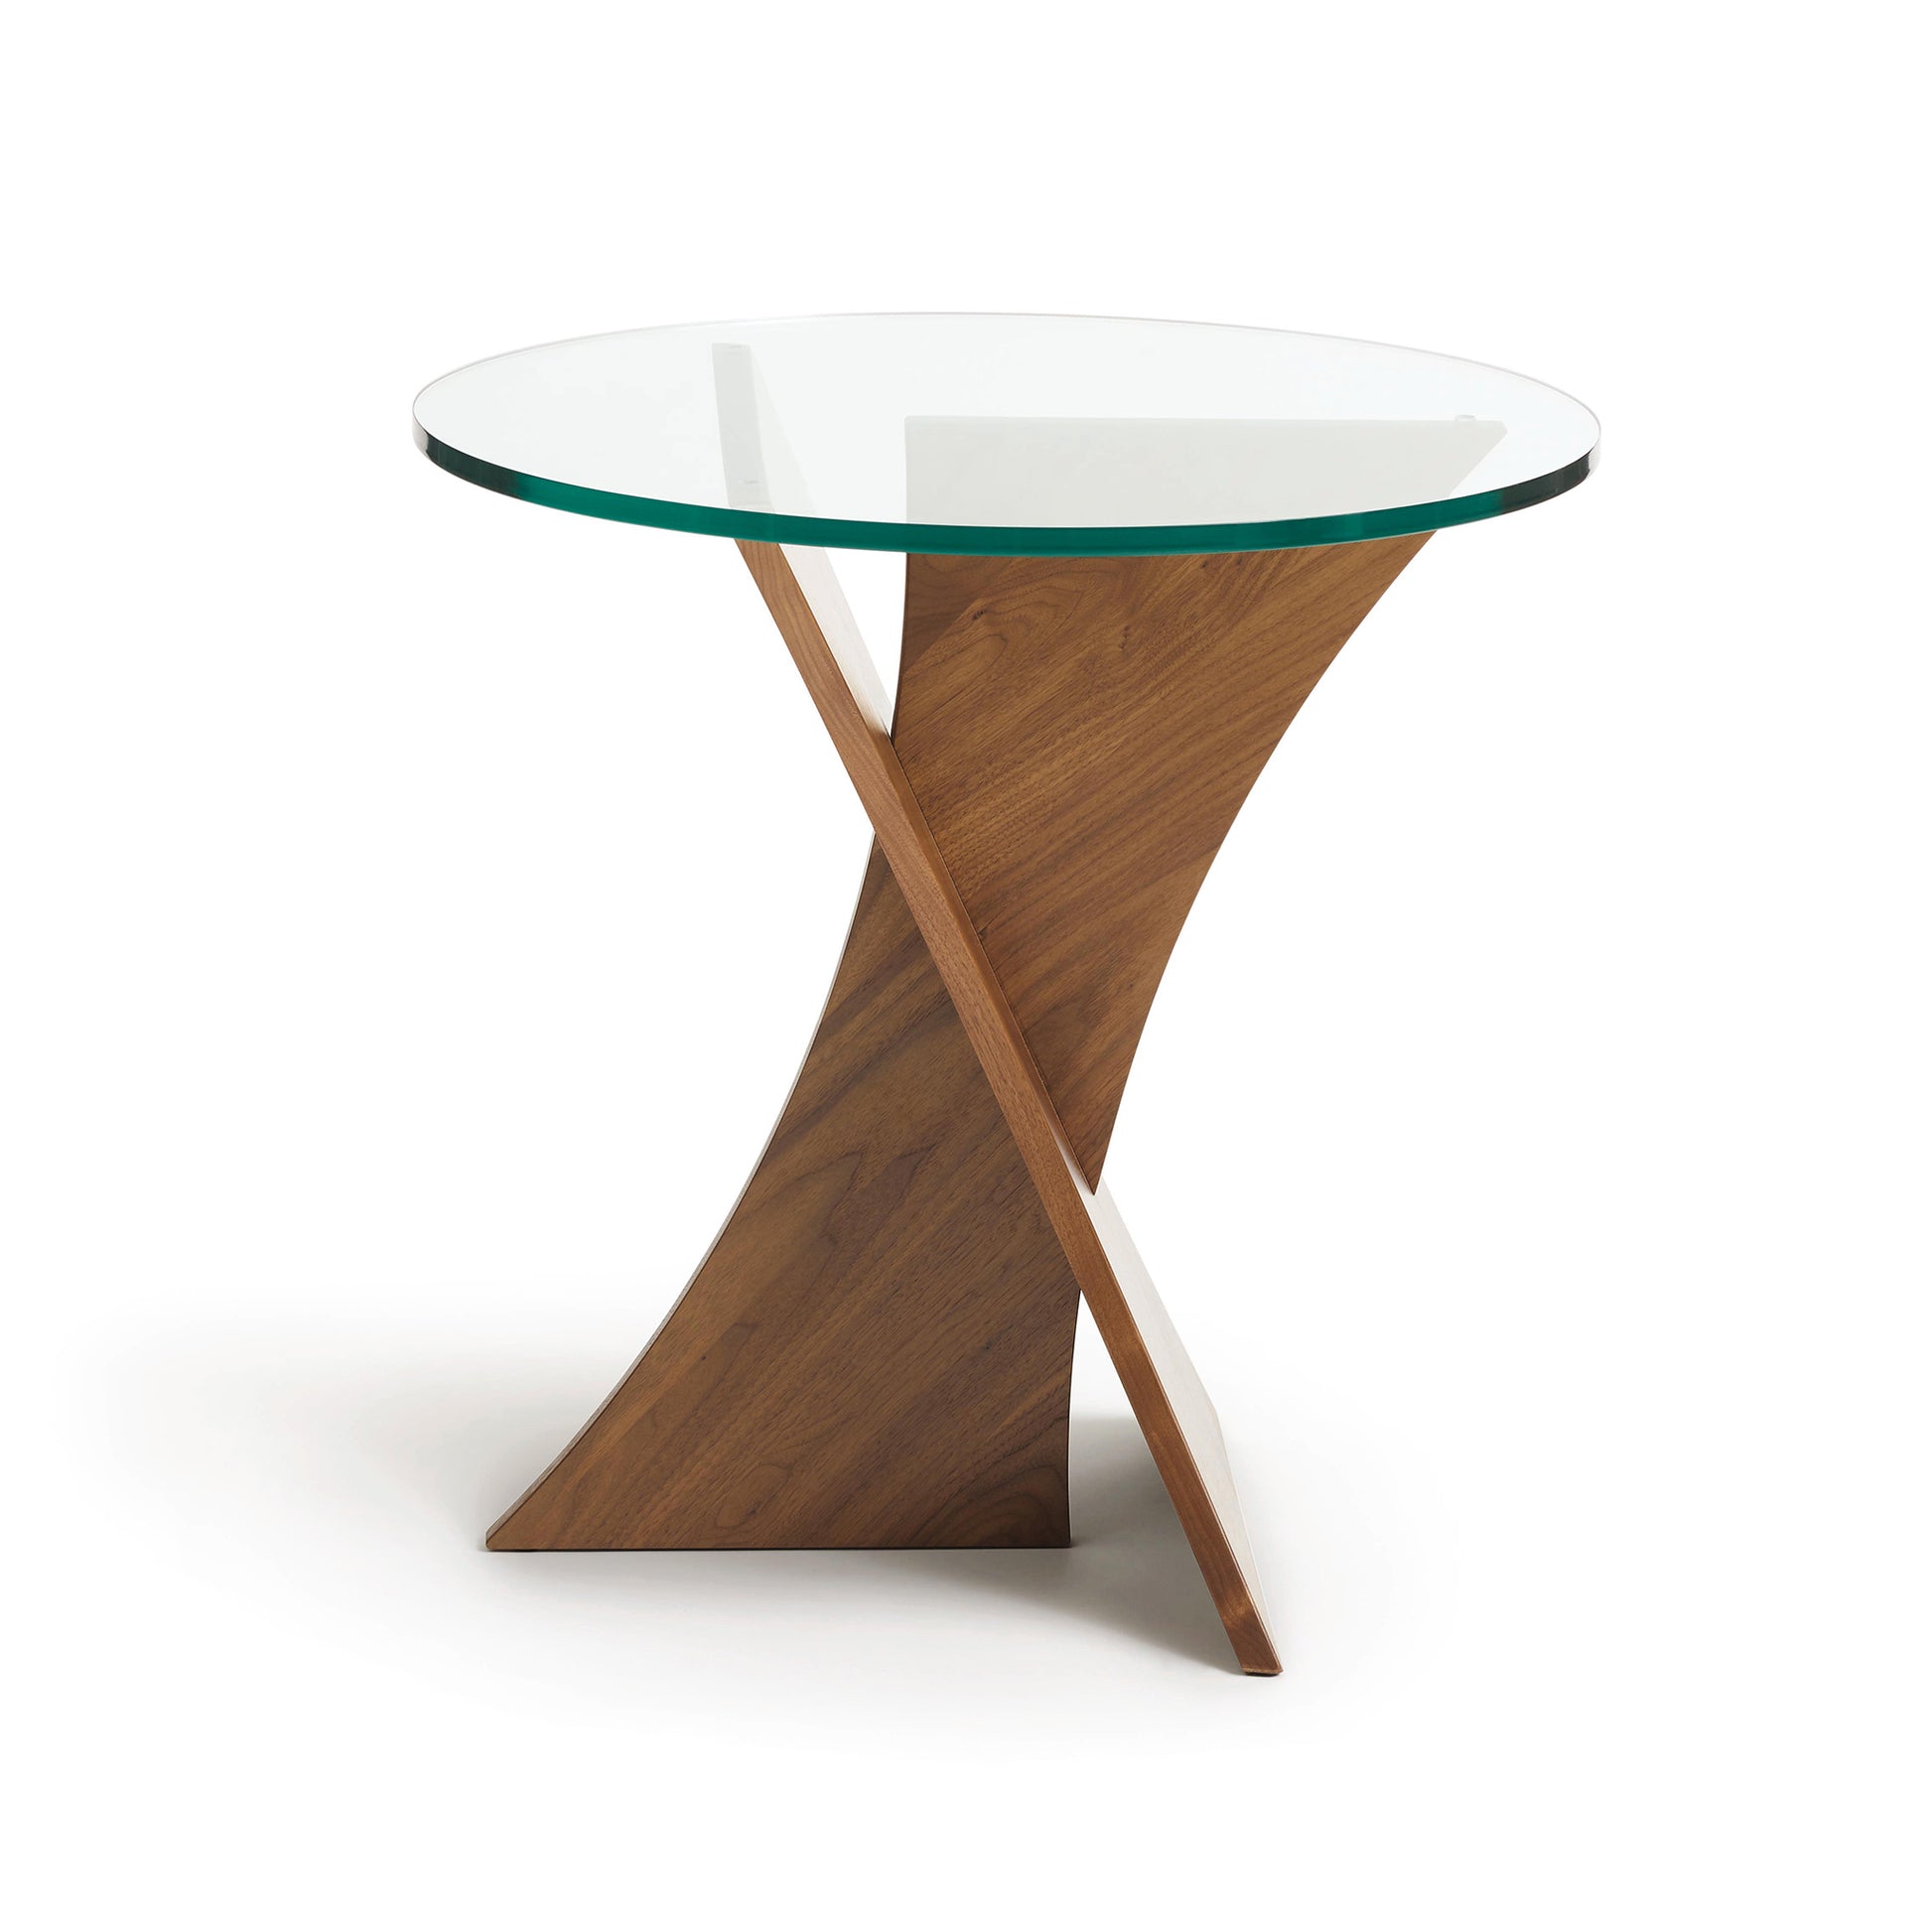 A modern Planes Round Glass Top End Table with a wooden cross base by Copeland Furniture on a white background.